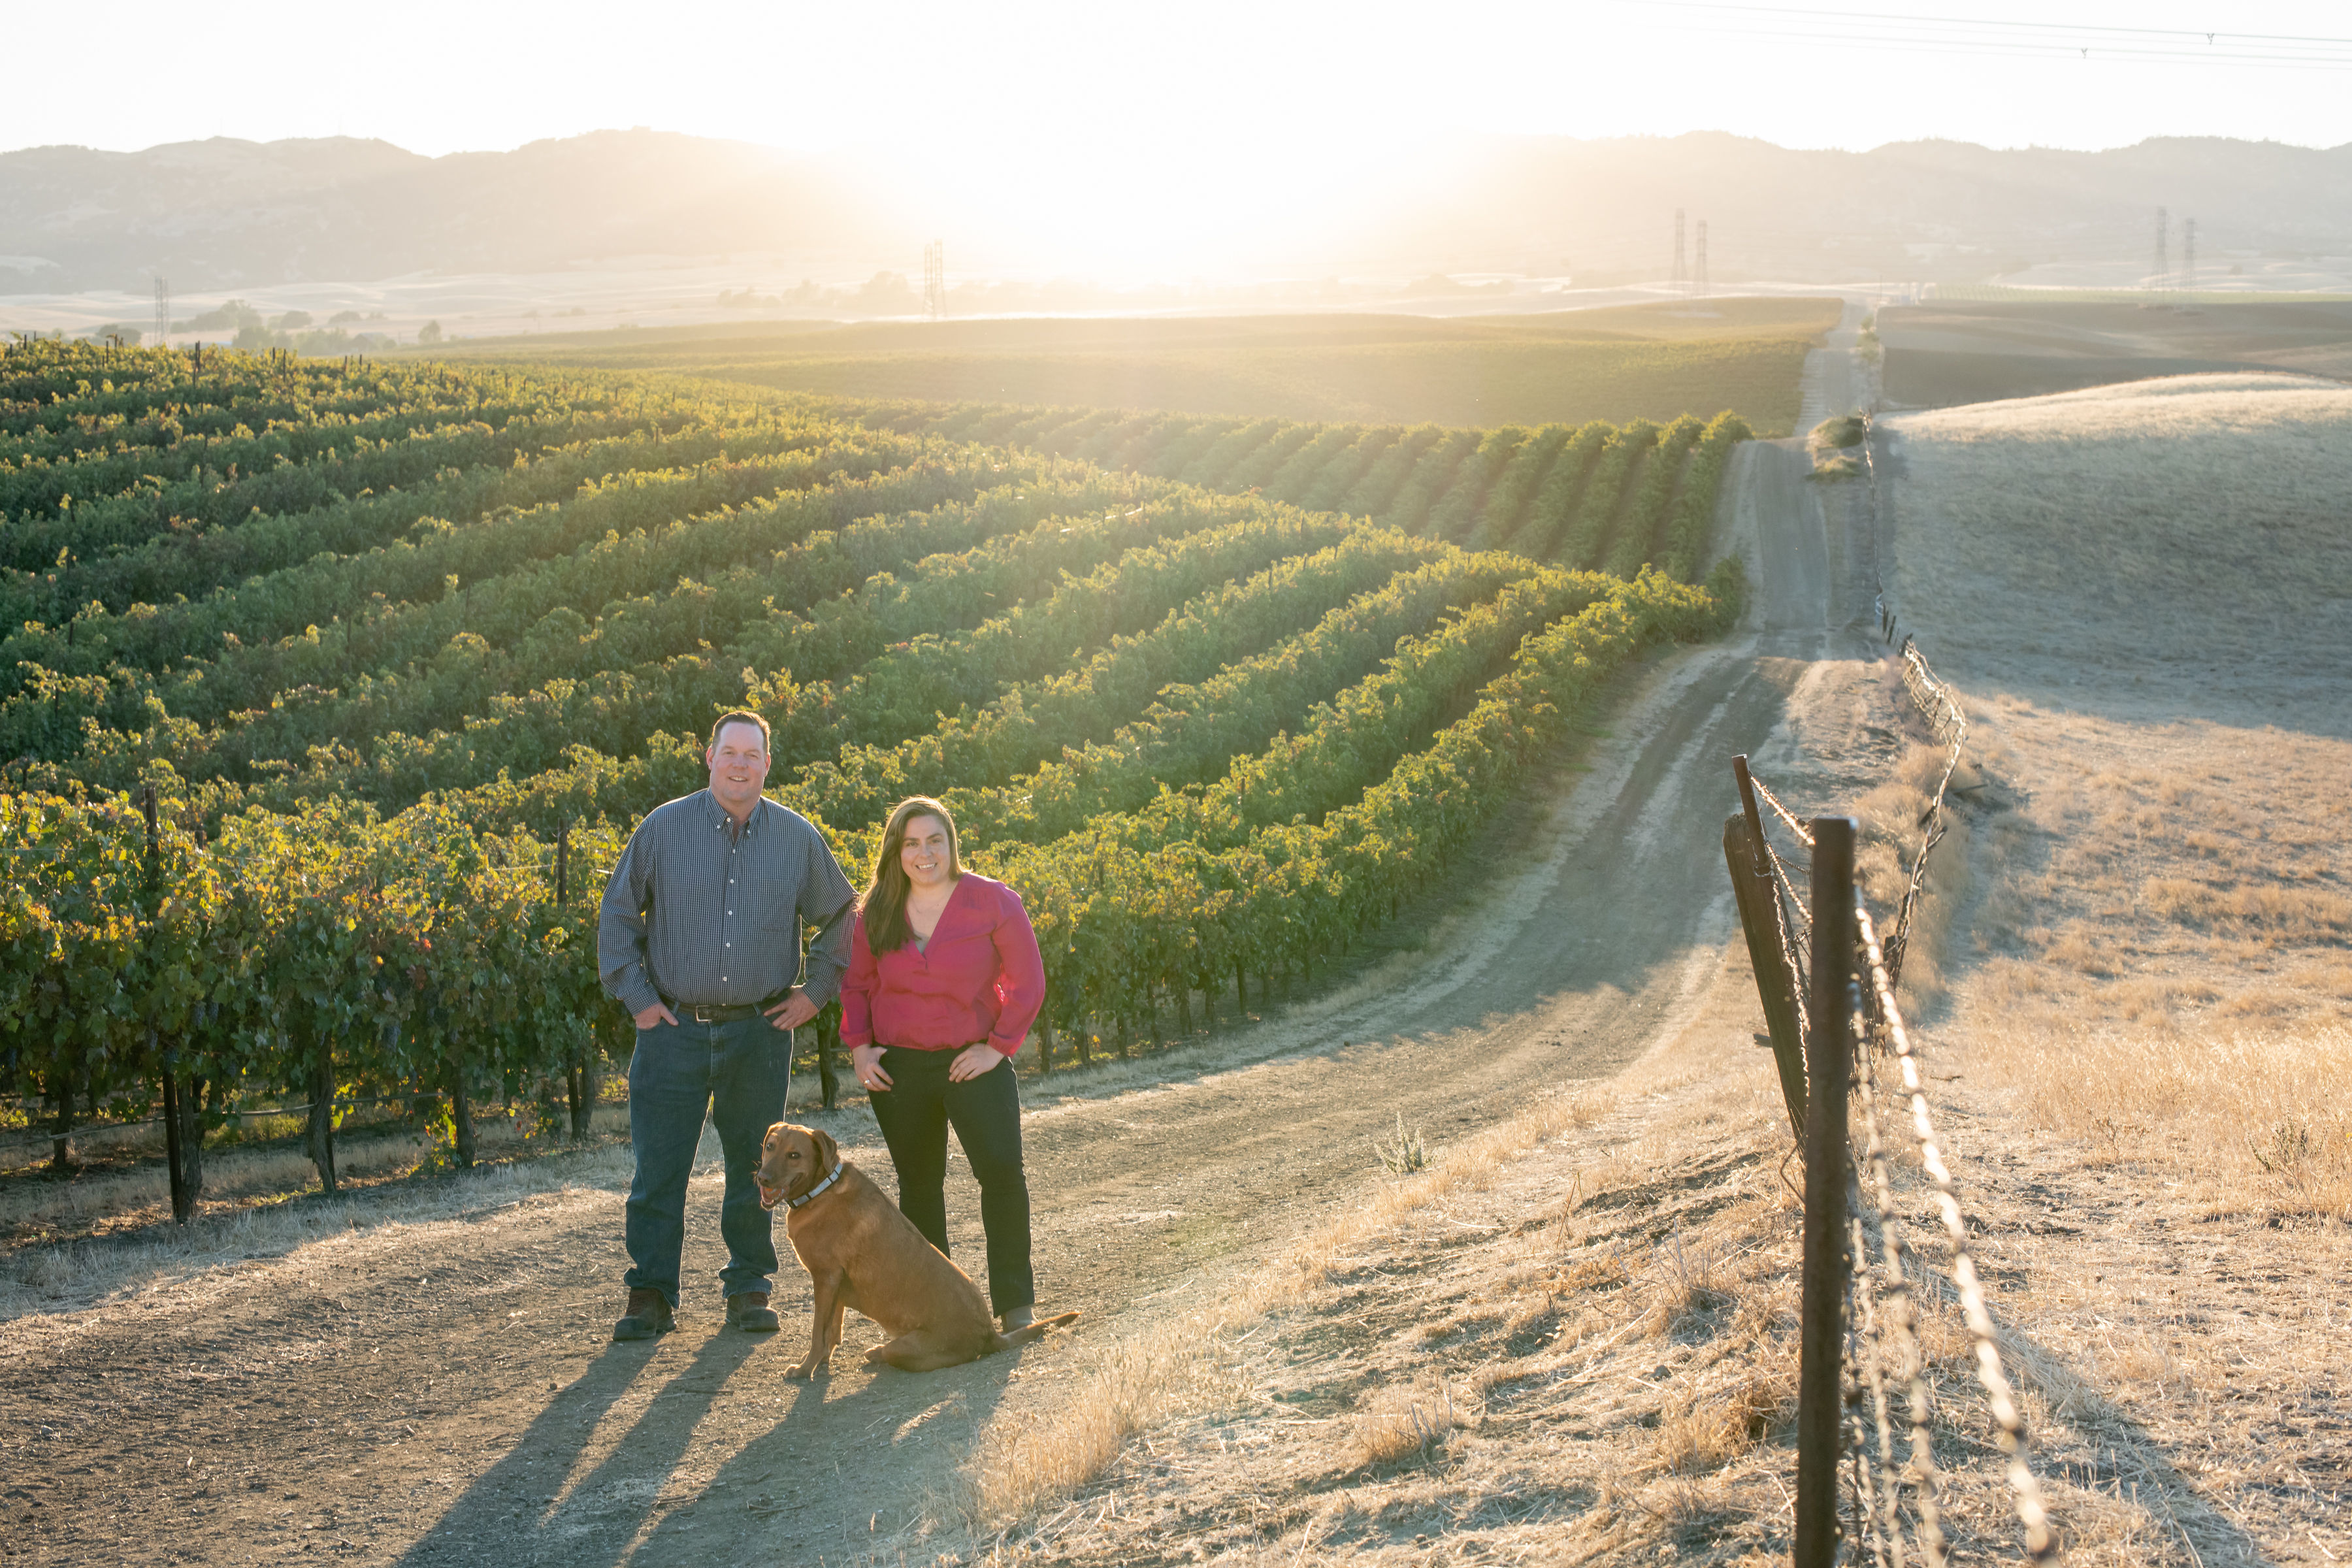 Flat Top Hills Head Winemaker Randy Herron and Consulting Winemaker Angelina Mondavi collaborated on the new wine.